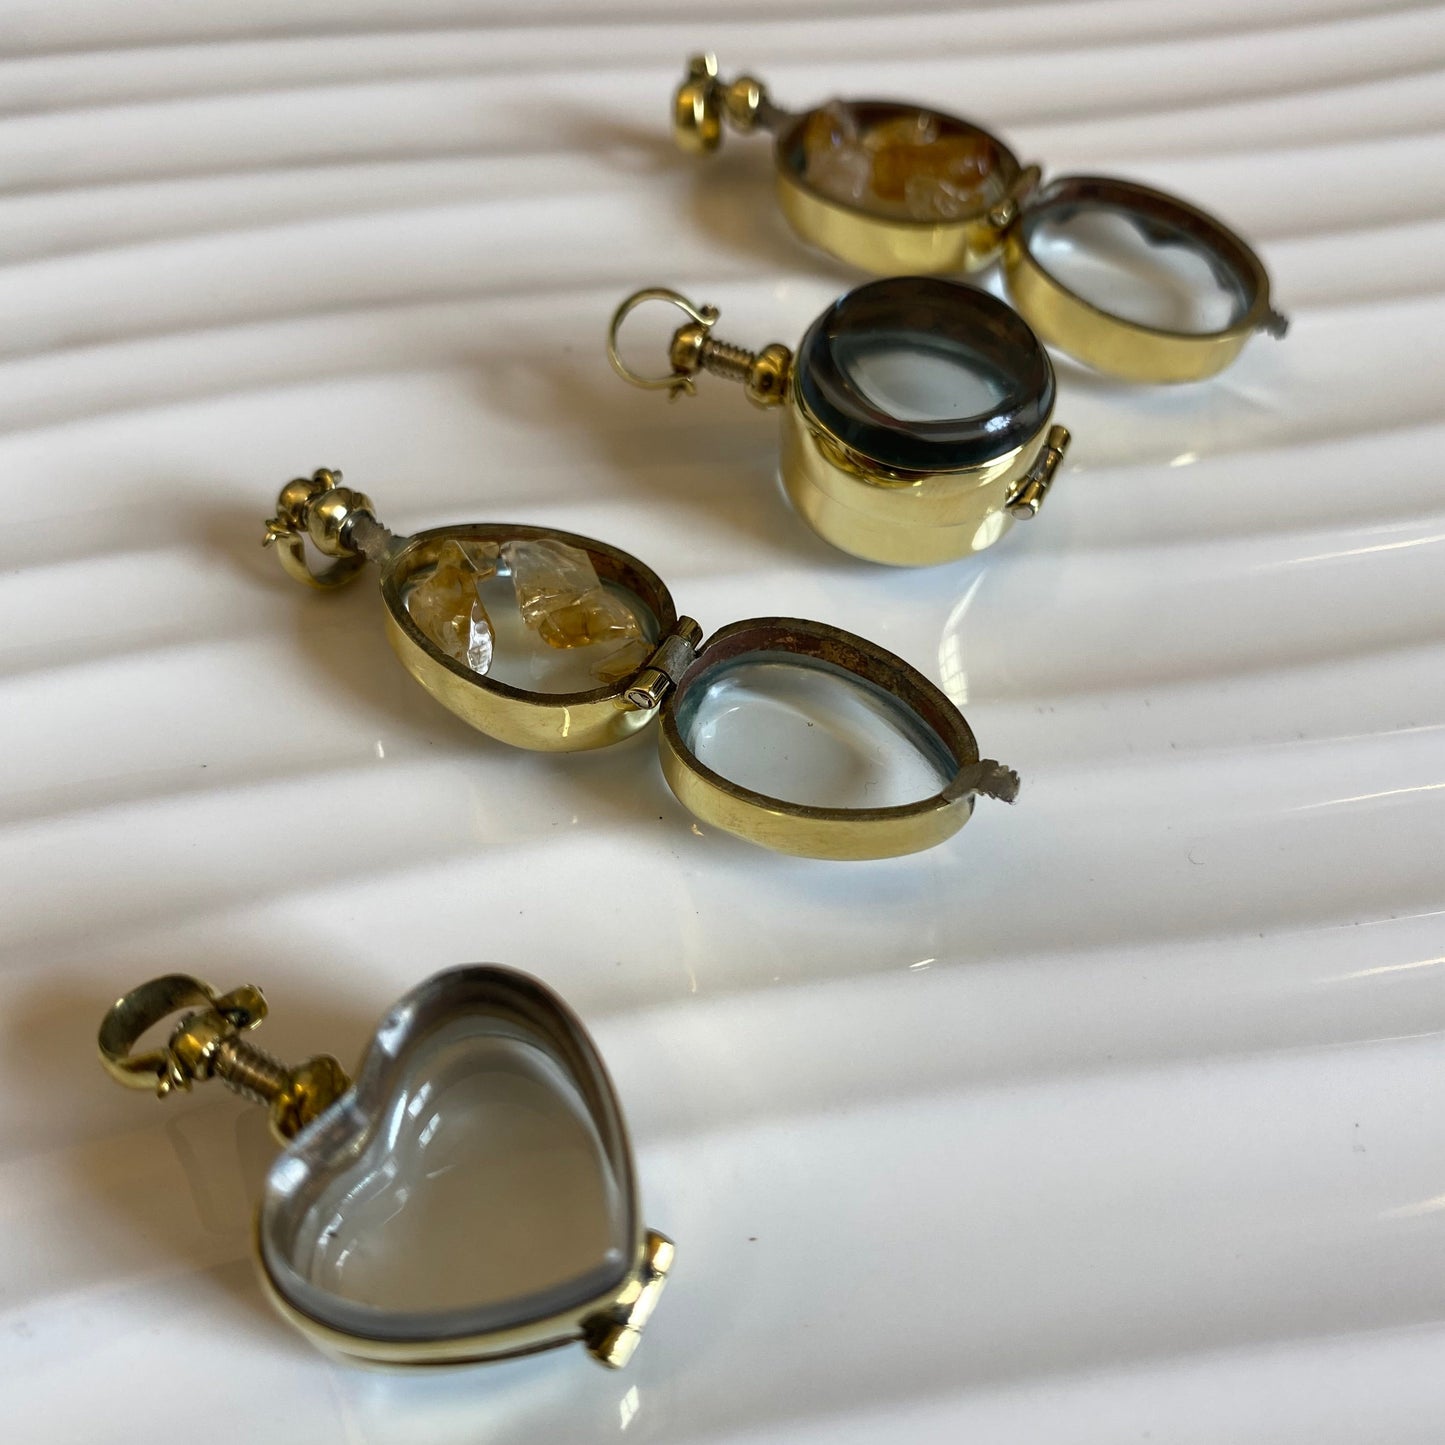 Small Size Gold Plated Deep Lockets - Choose your shape